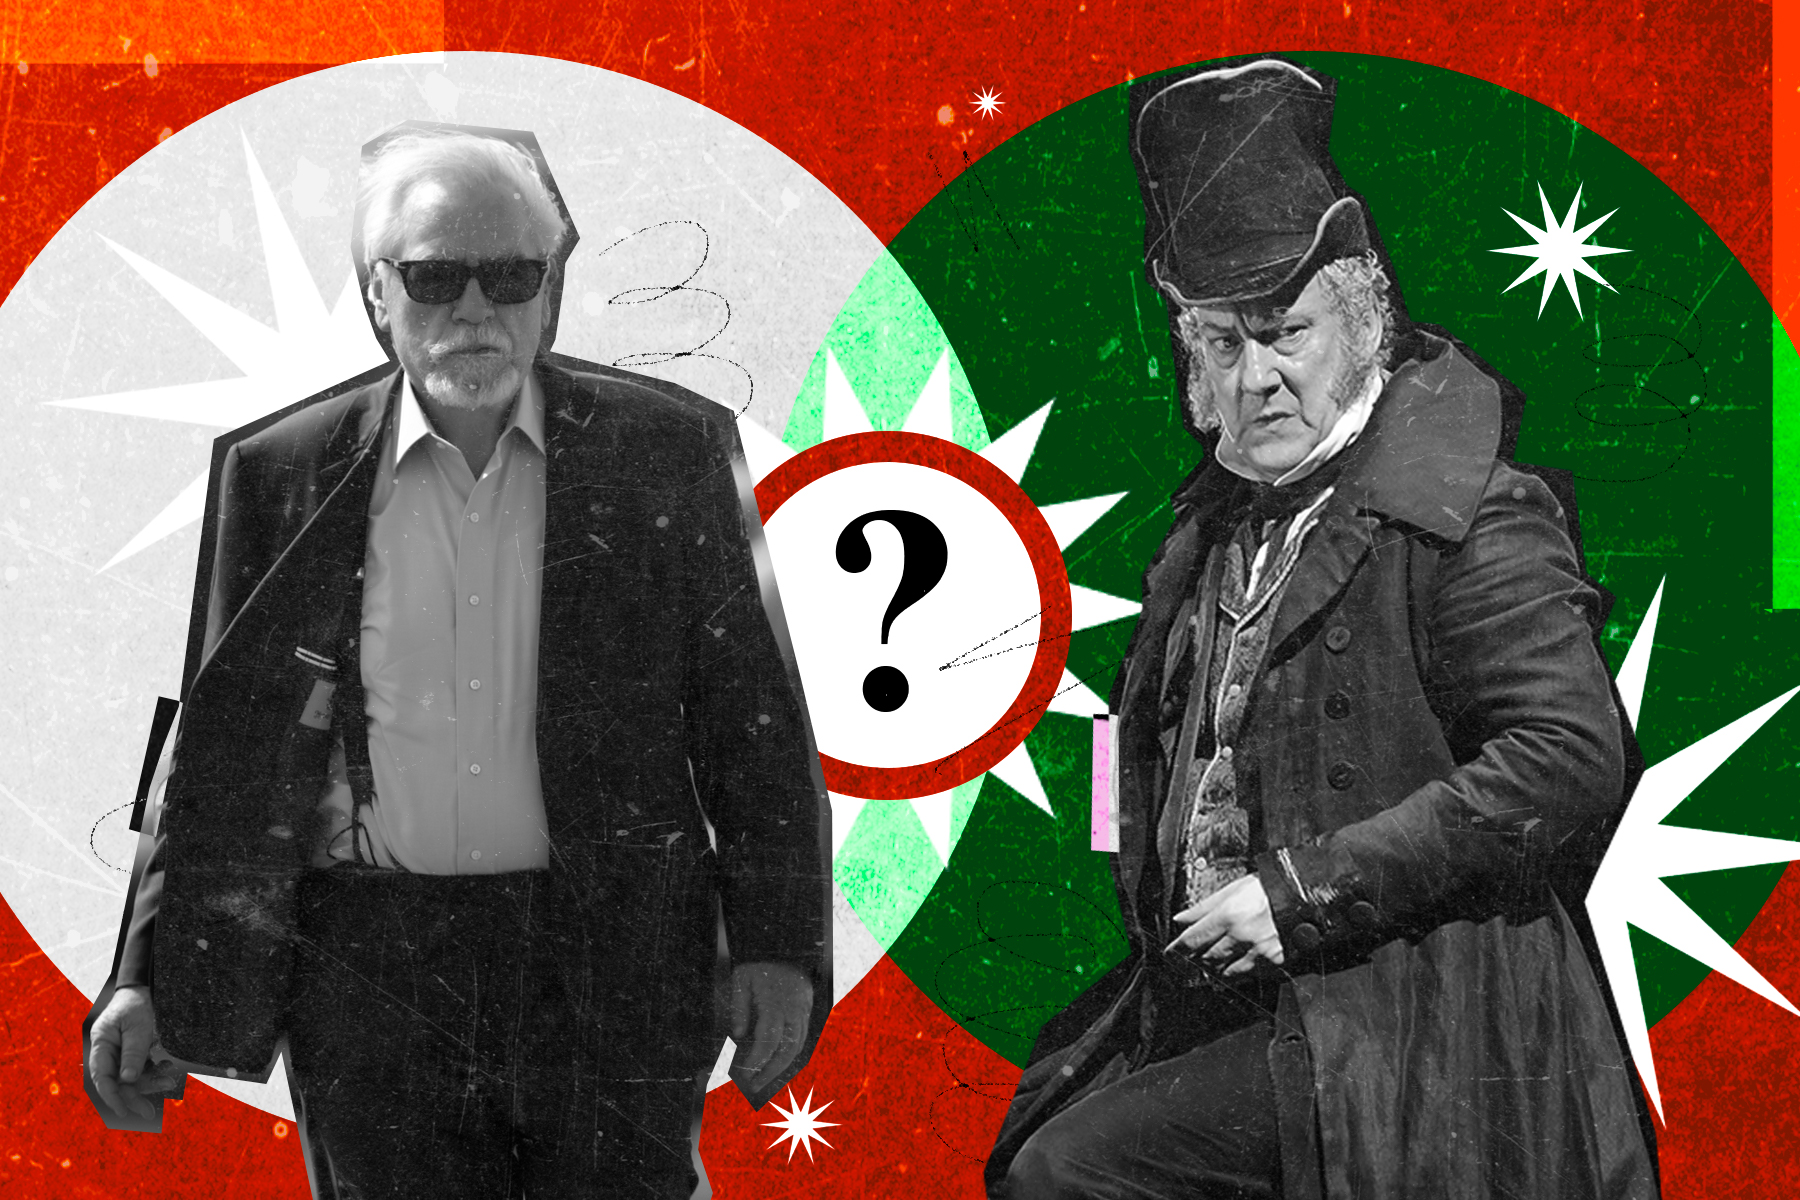 An image of Succession's Logan Roy on the left, and Ebenezer Scrooge on the right, with a question mark separating them..